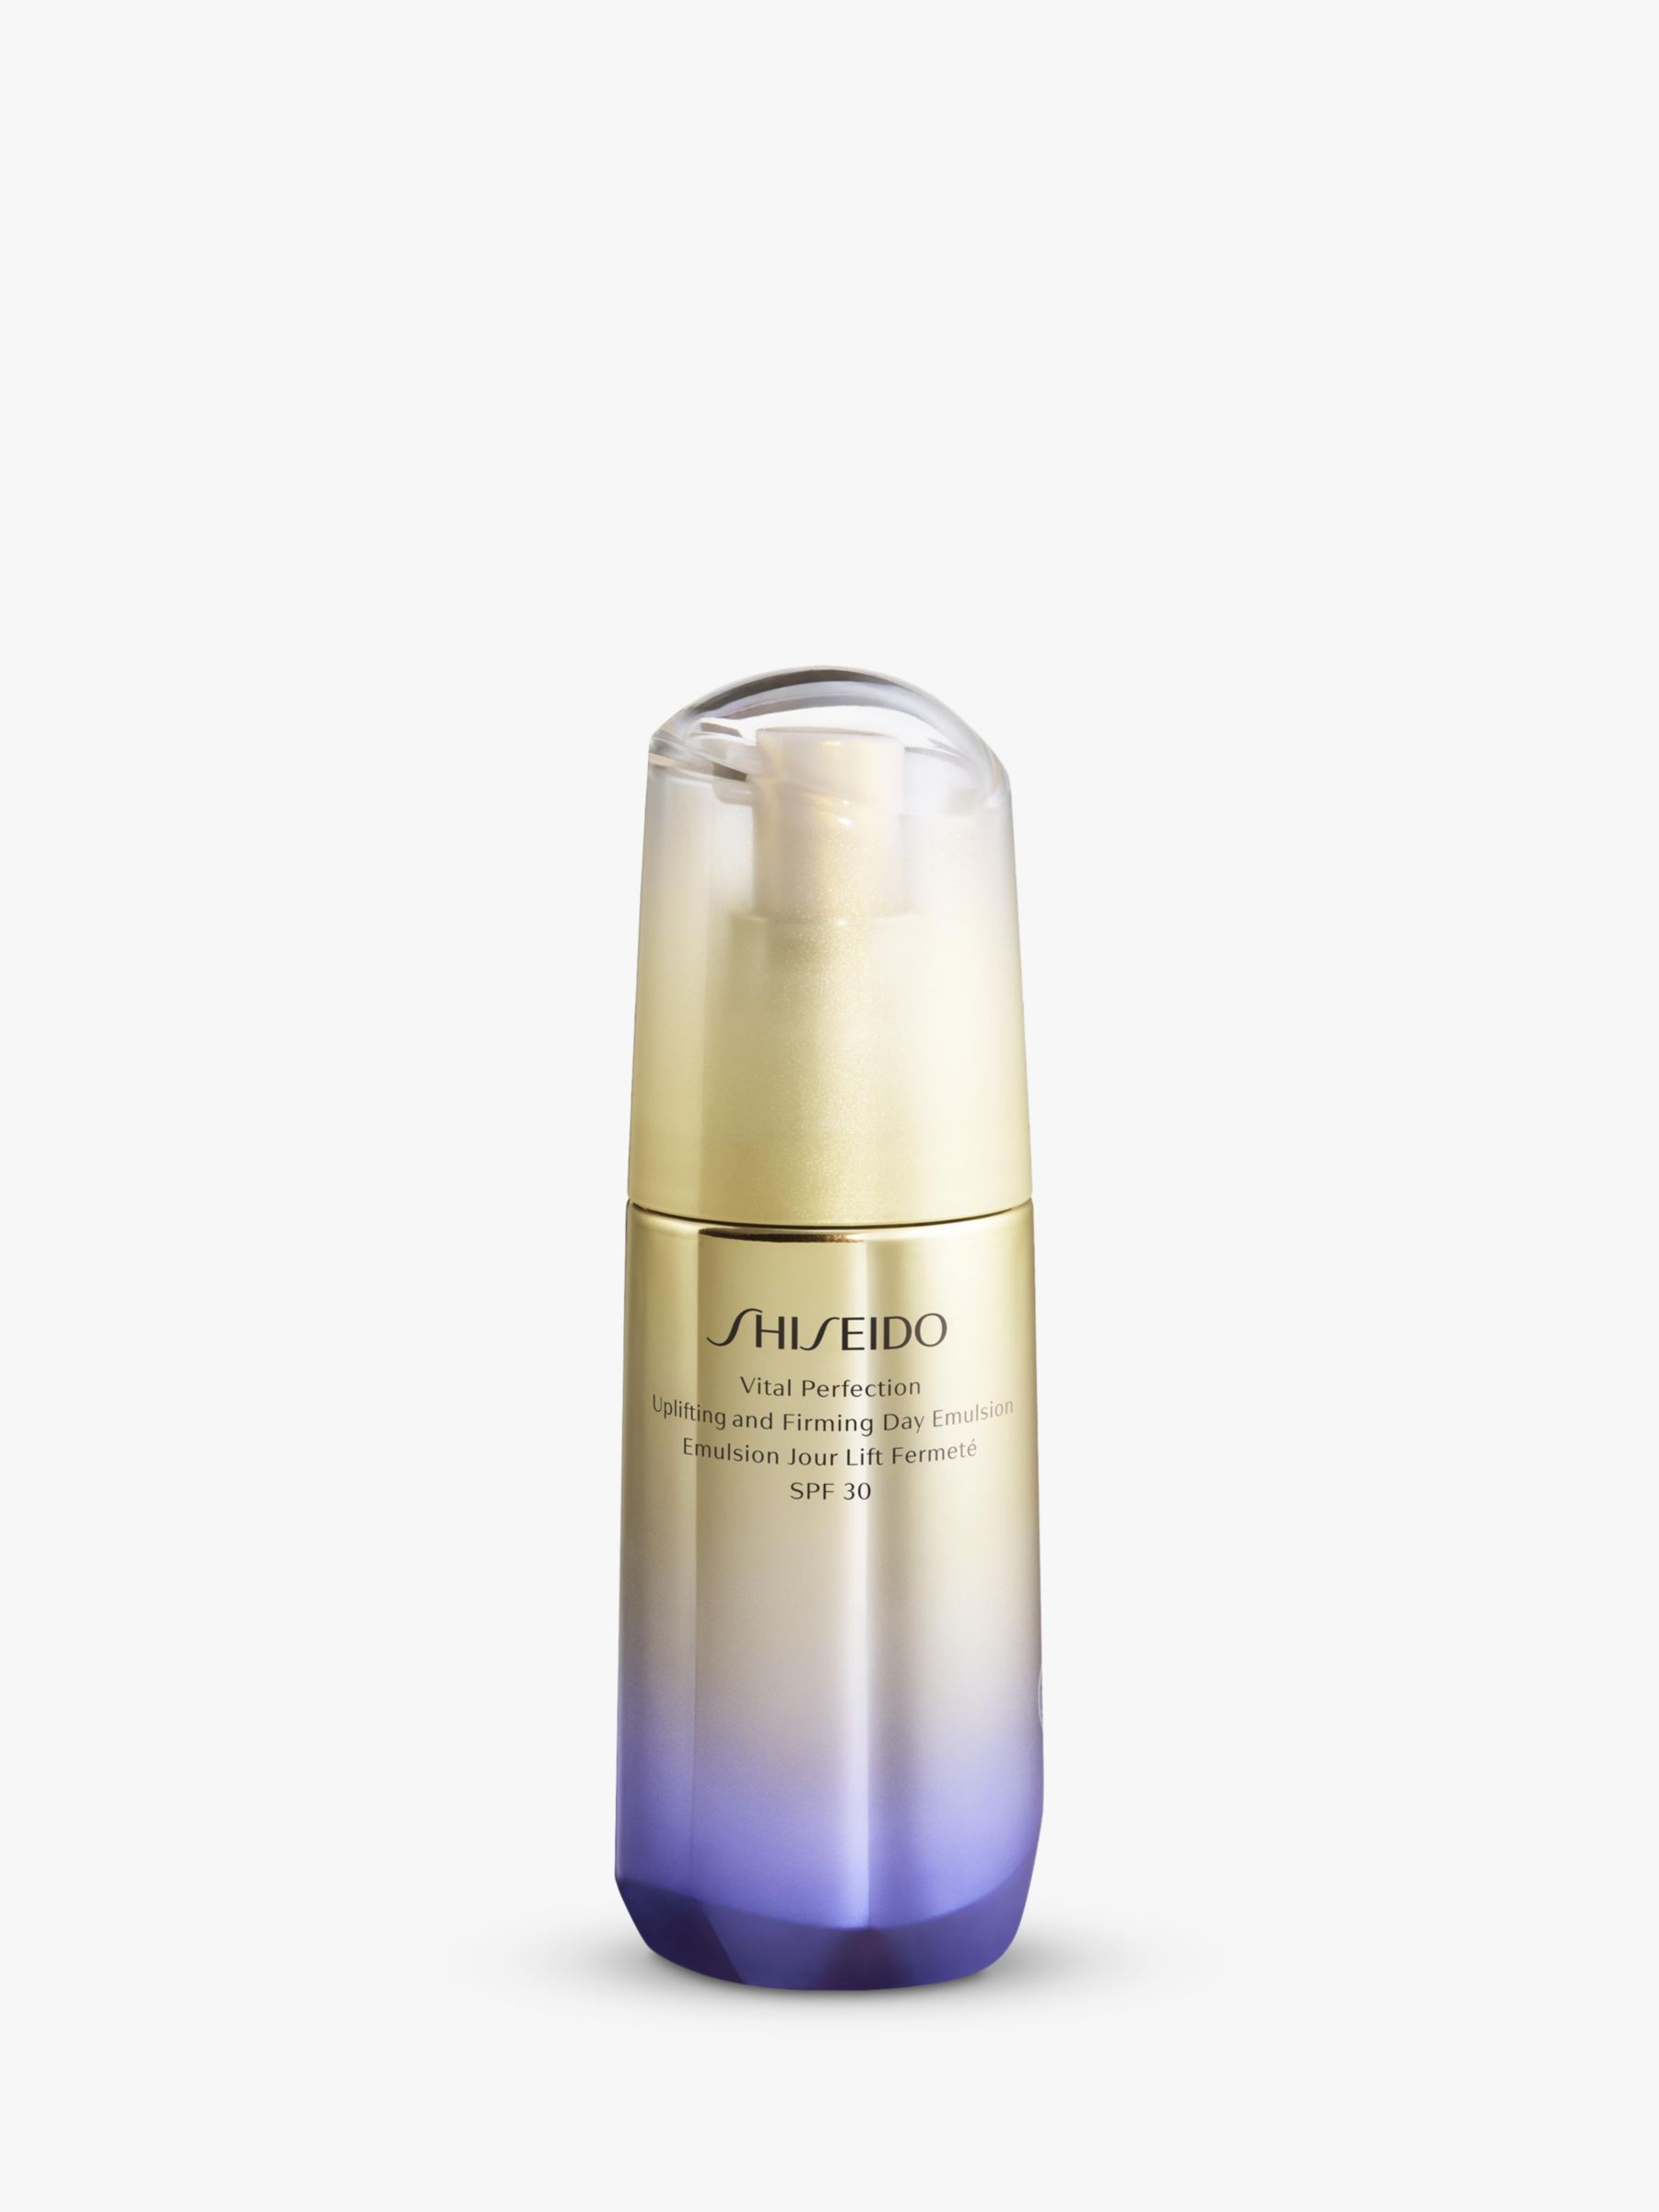 Shiseido Vital Perfection Uplifting and Firming Day Emulsion SPF 30, 75ml 1